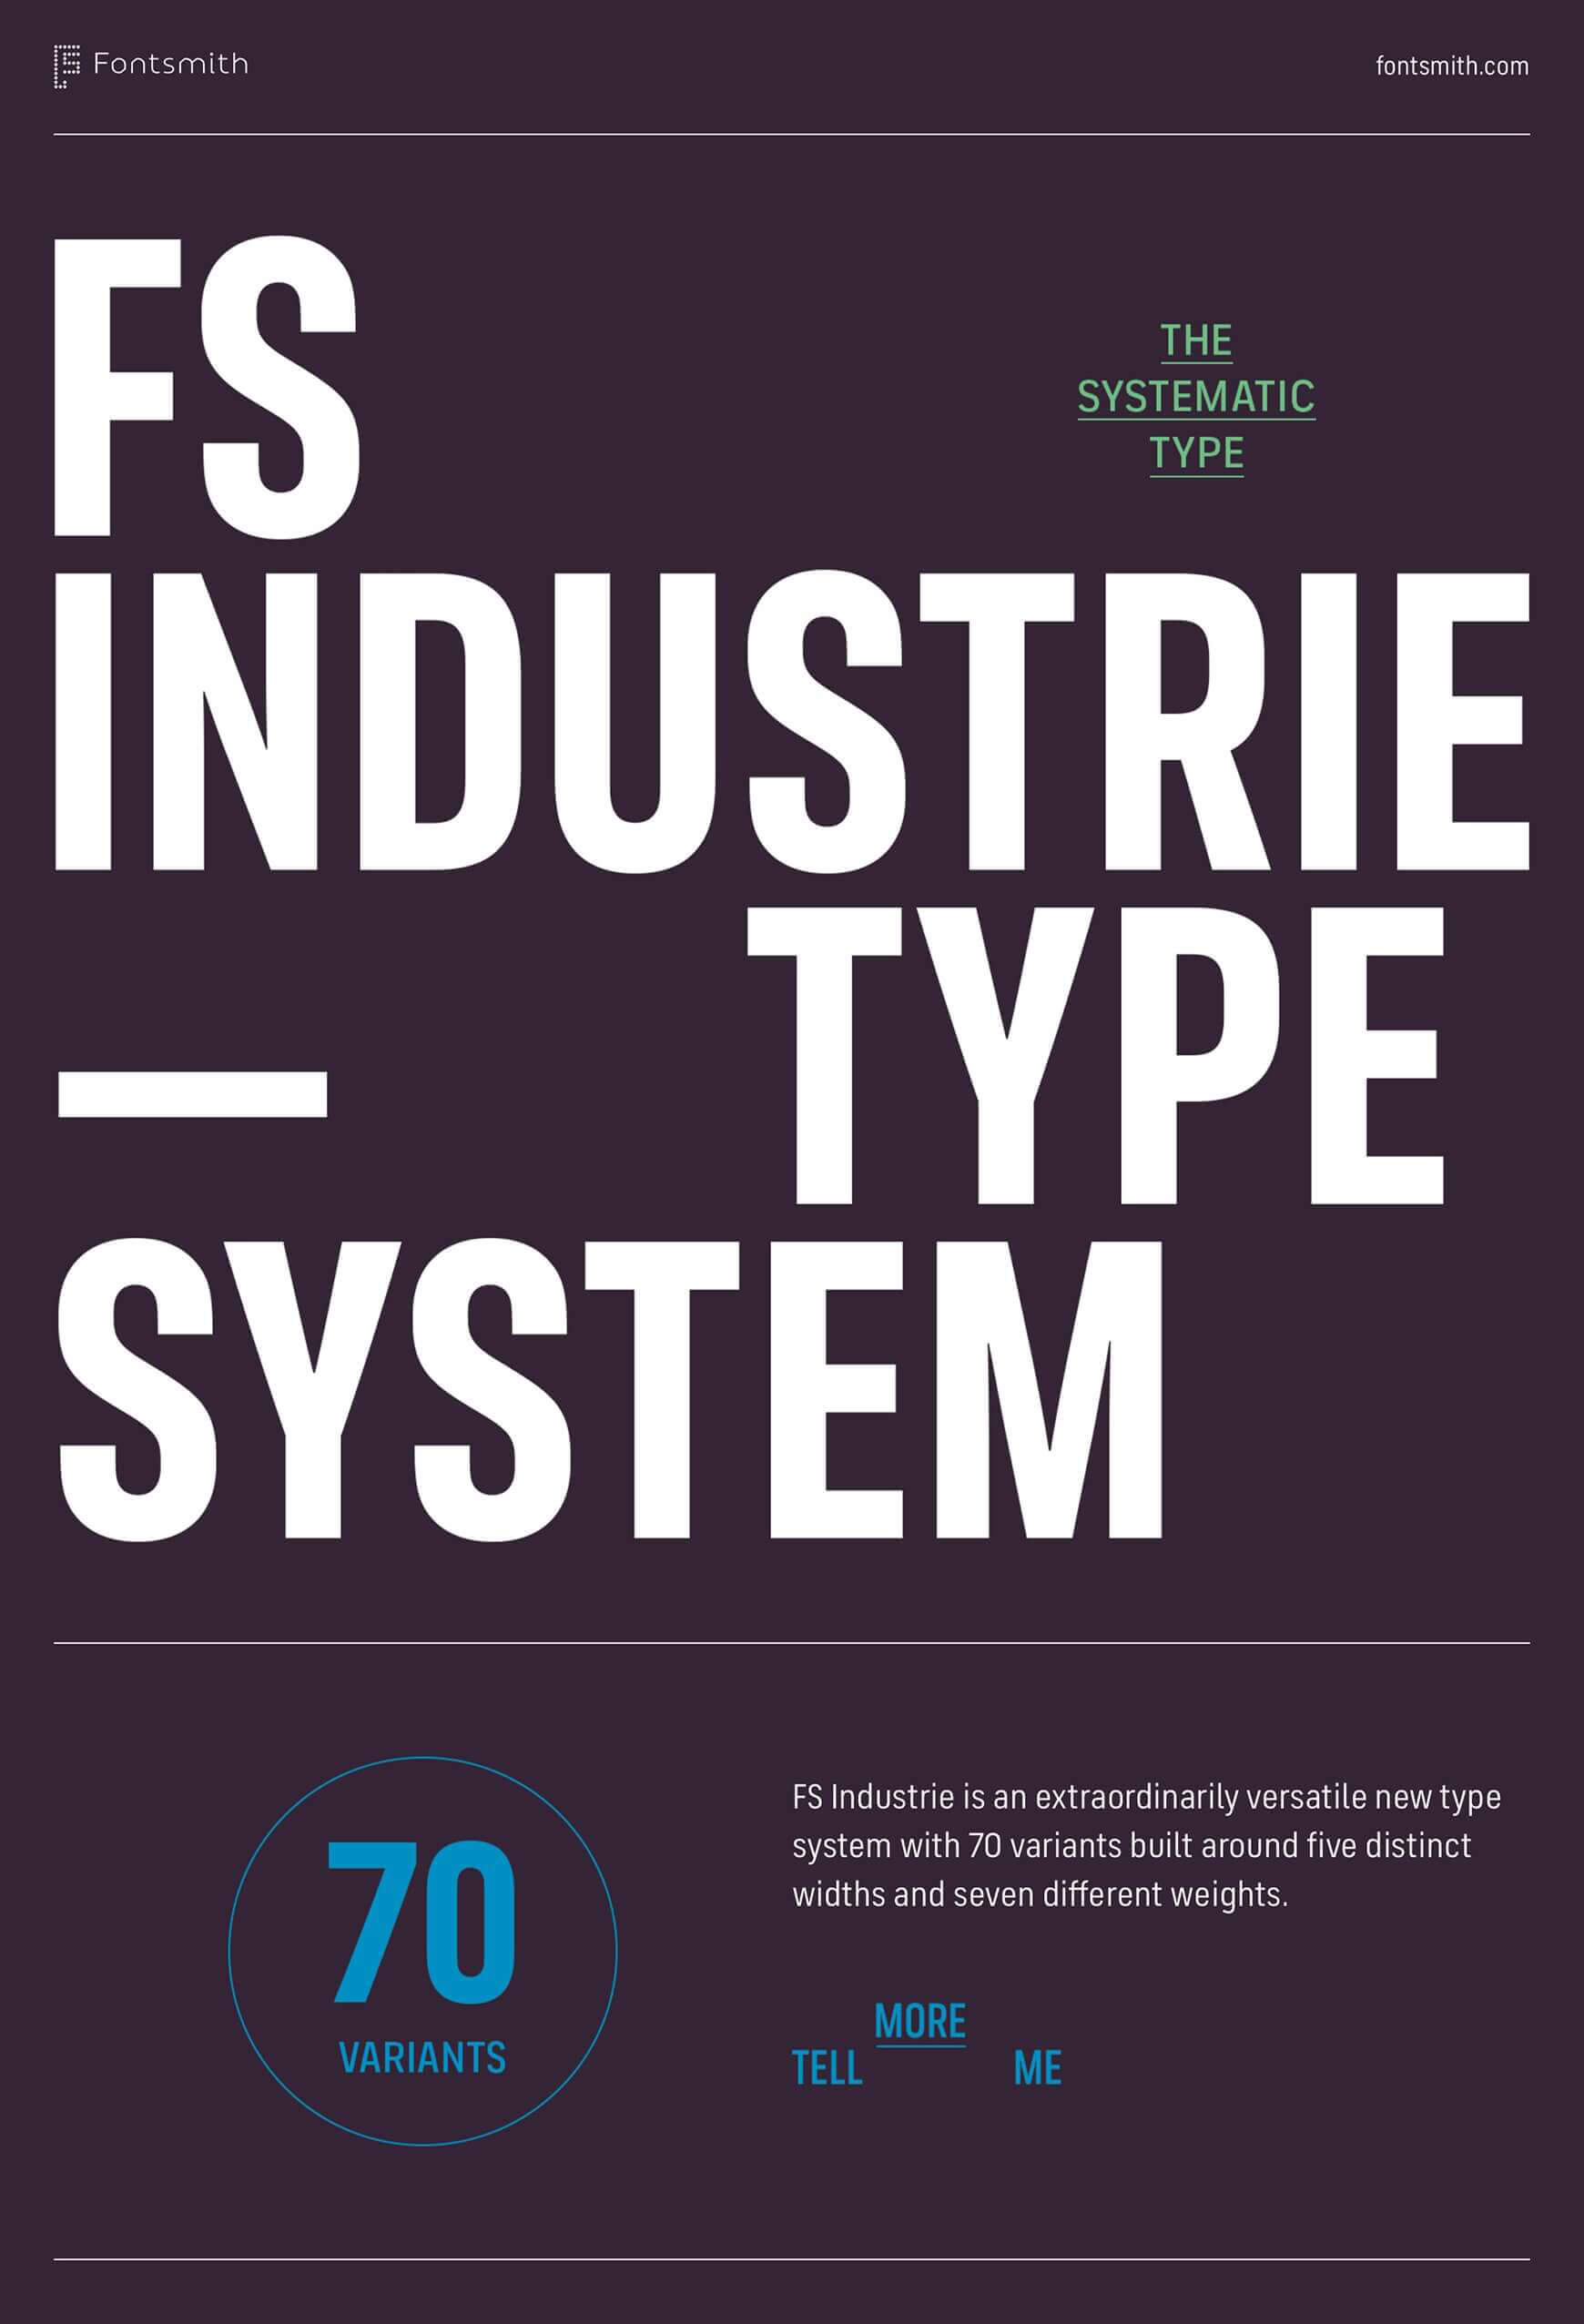 Fontsmith - FS Industrie launch